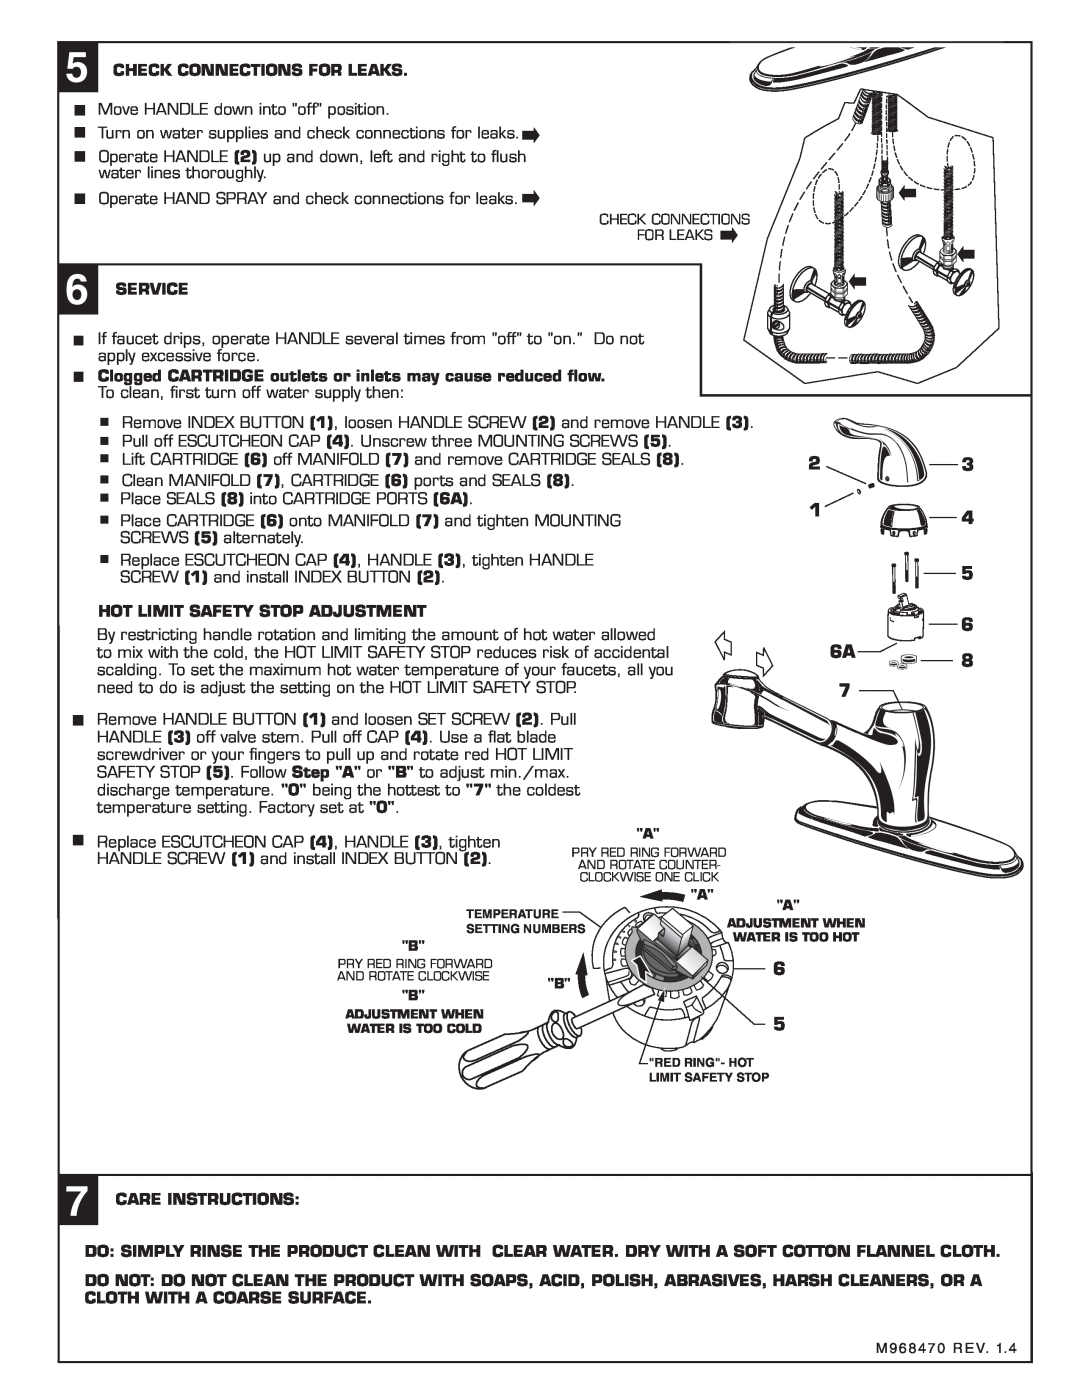 American Standard 4114.1 Check Connections For Leaks, Service, Clogged CARTRIDGE outlets or inlets may cause reduced ﬂow 